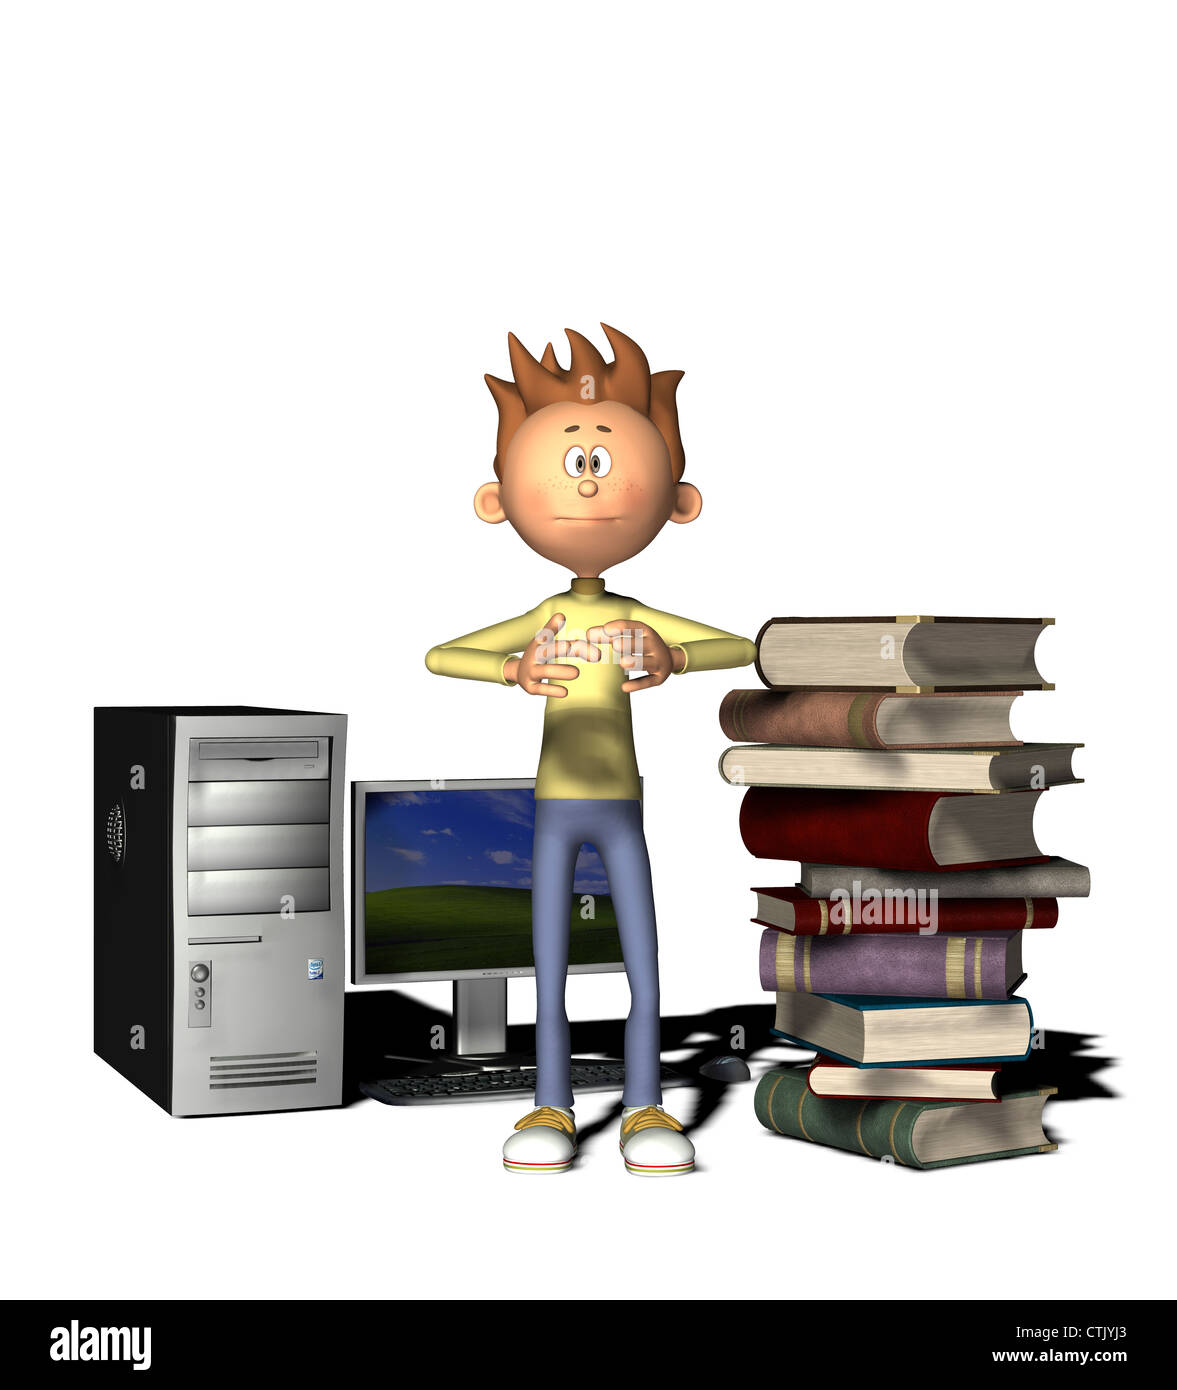 cartoon figure with computer and books Stock Photo